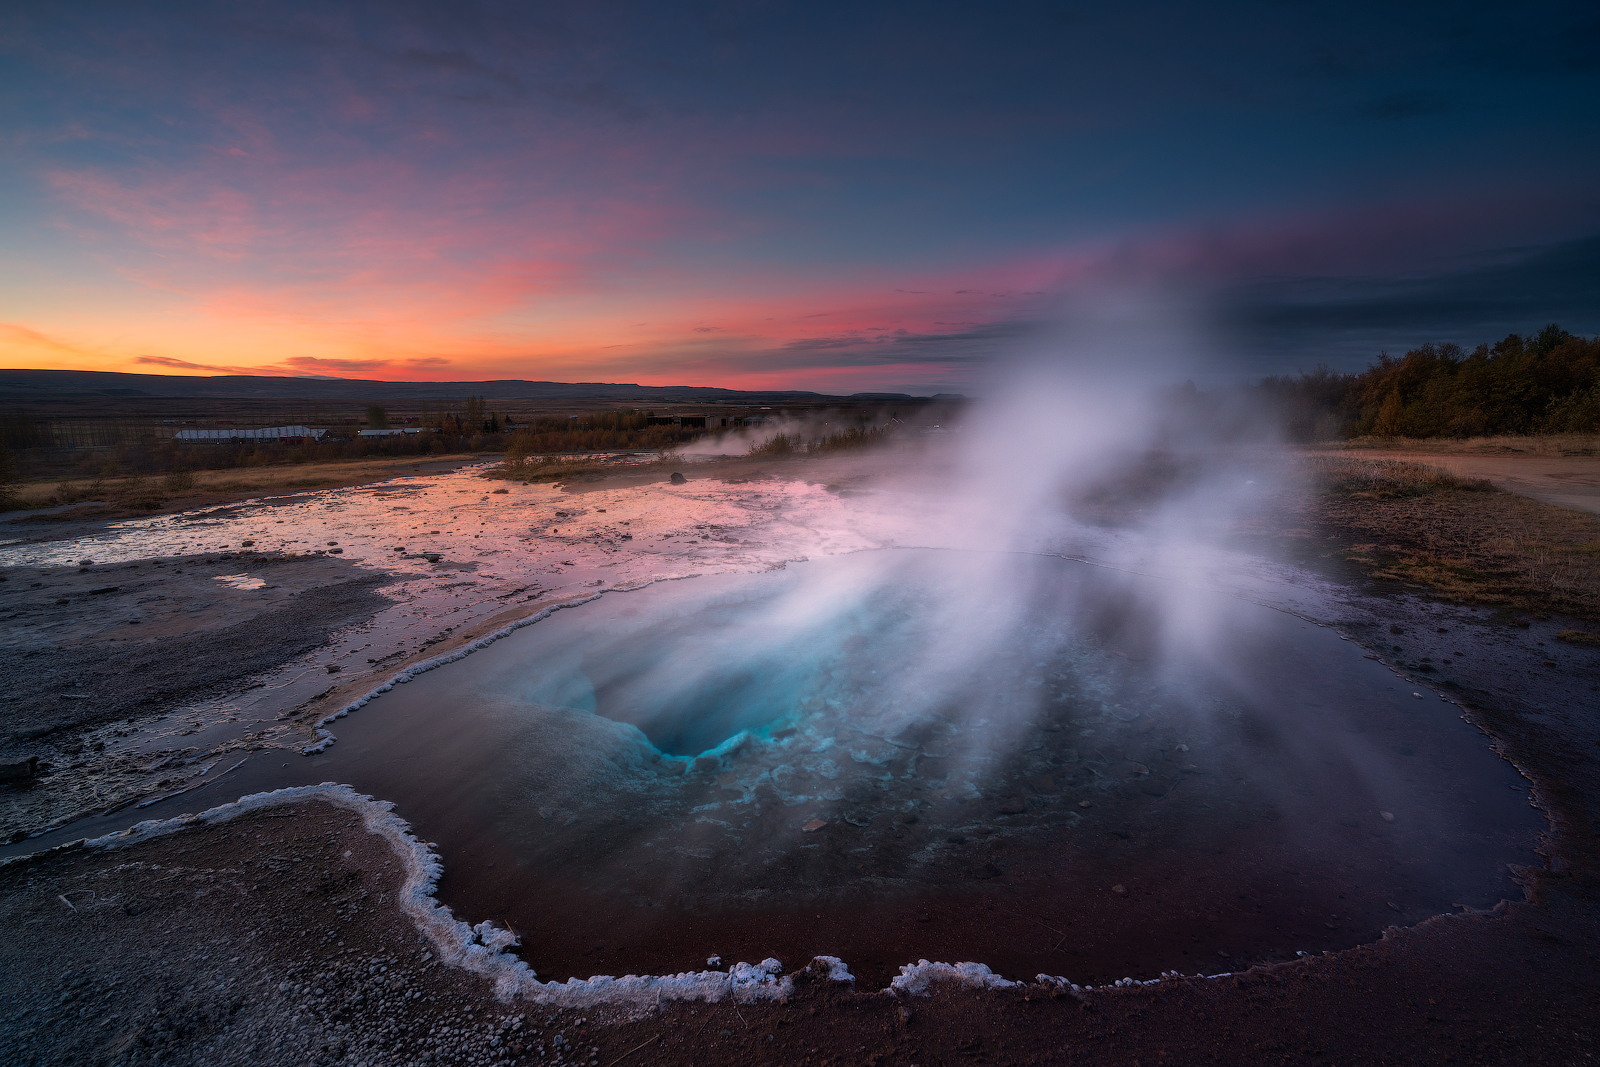 In the Geysir geothermal area, you'll feel a thrilling moment of anticipation right before the geyser Strokkur erupts